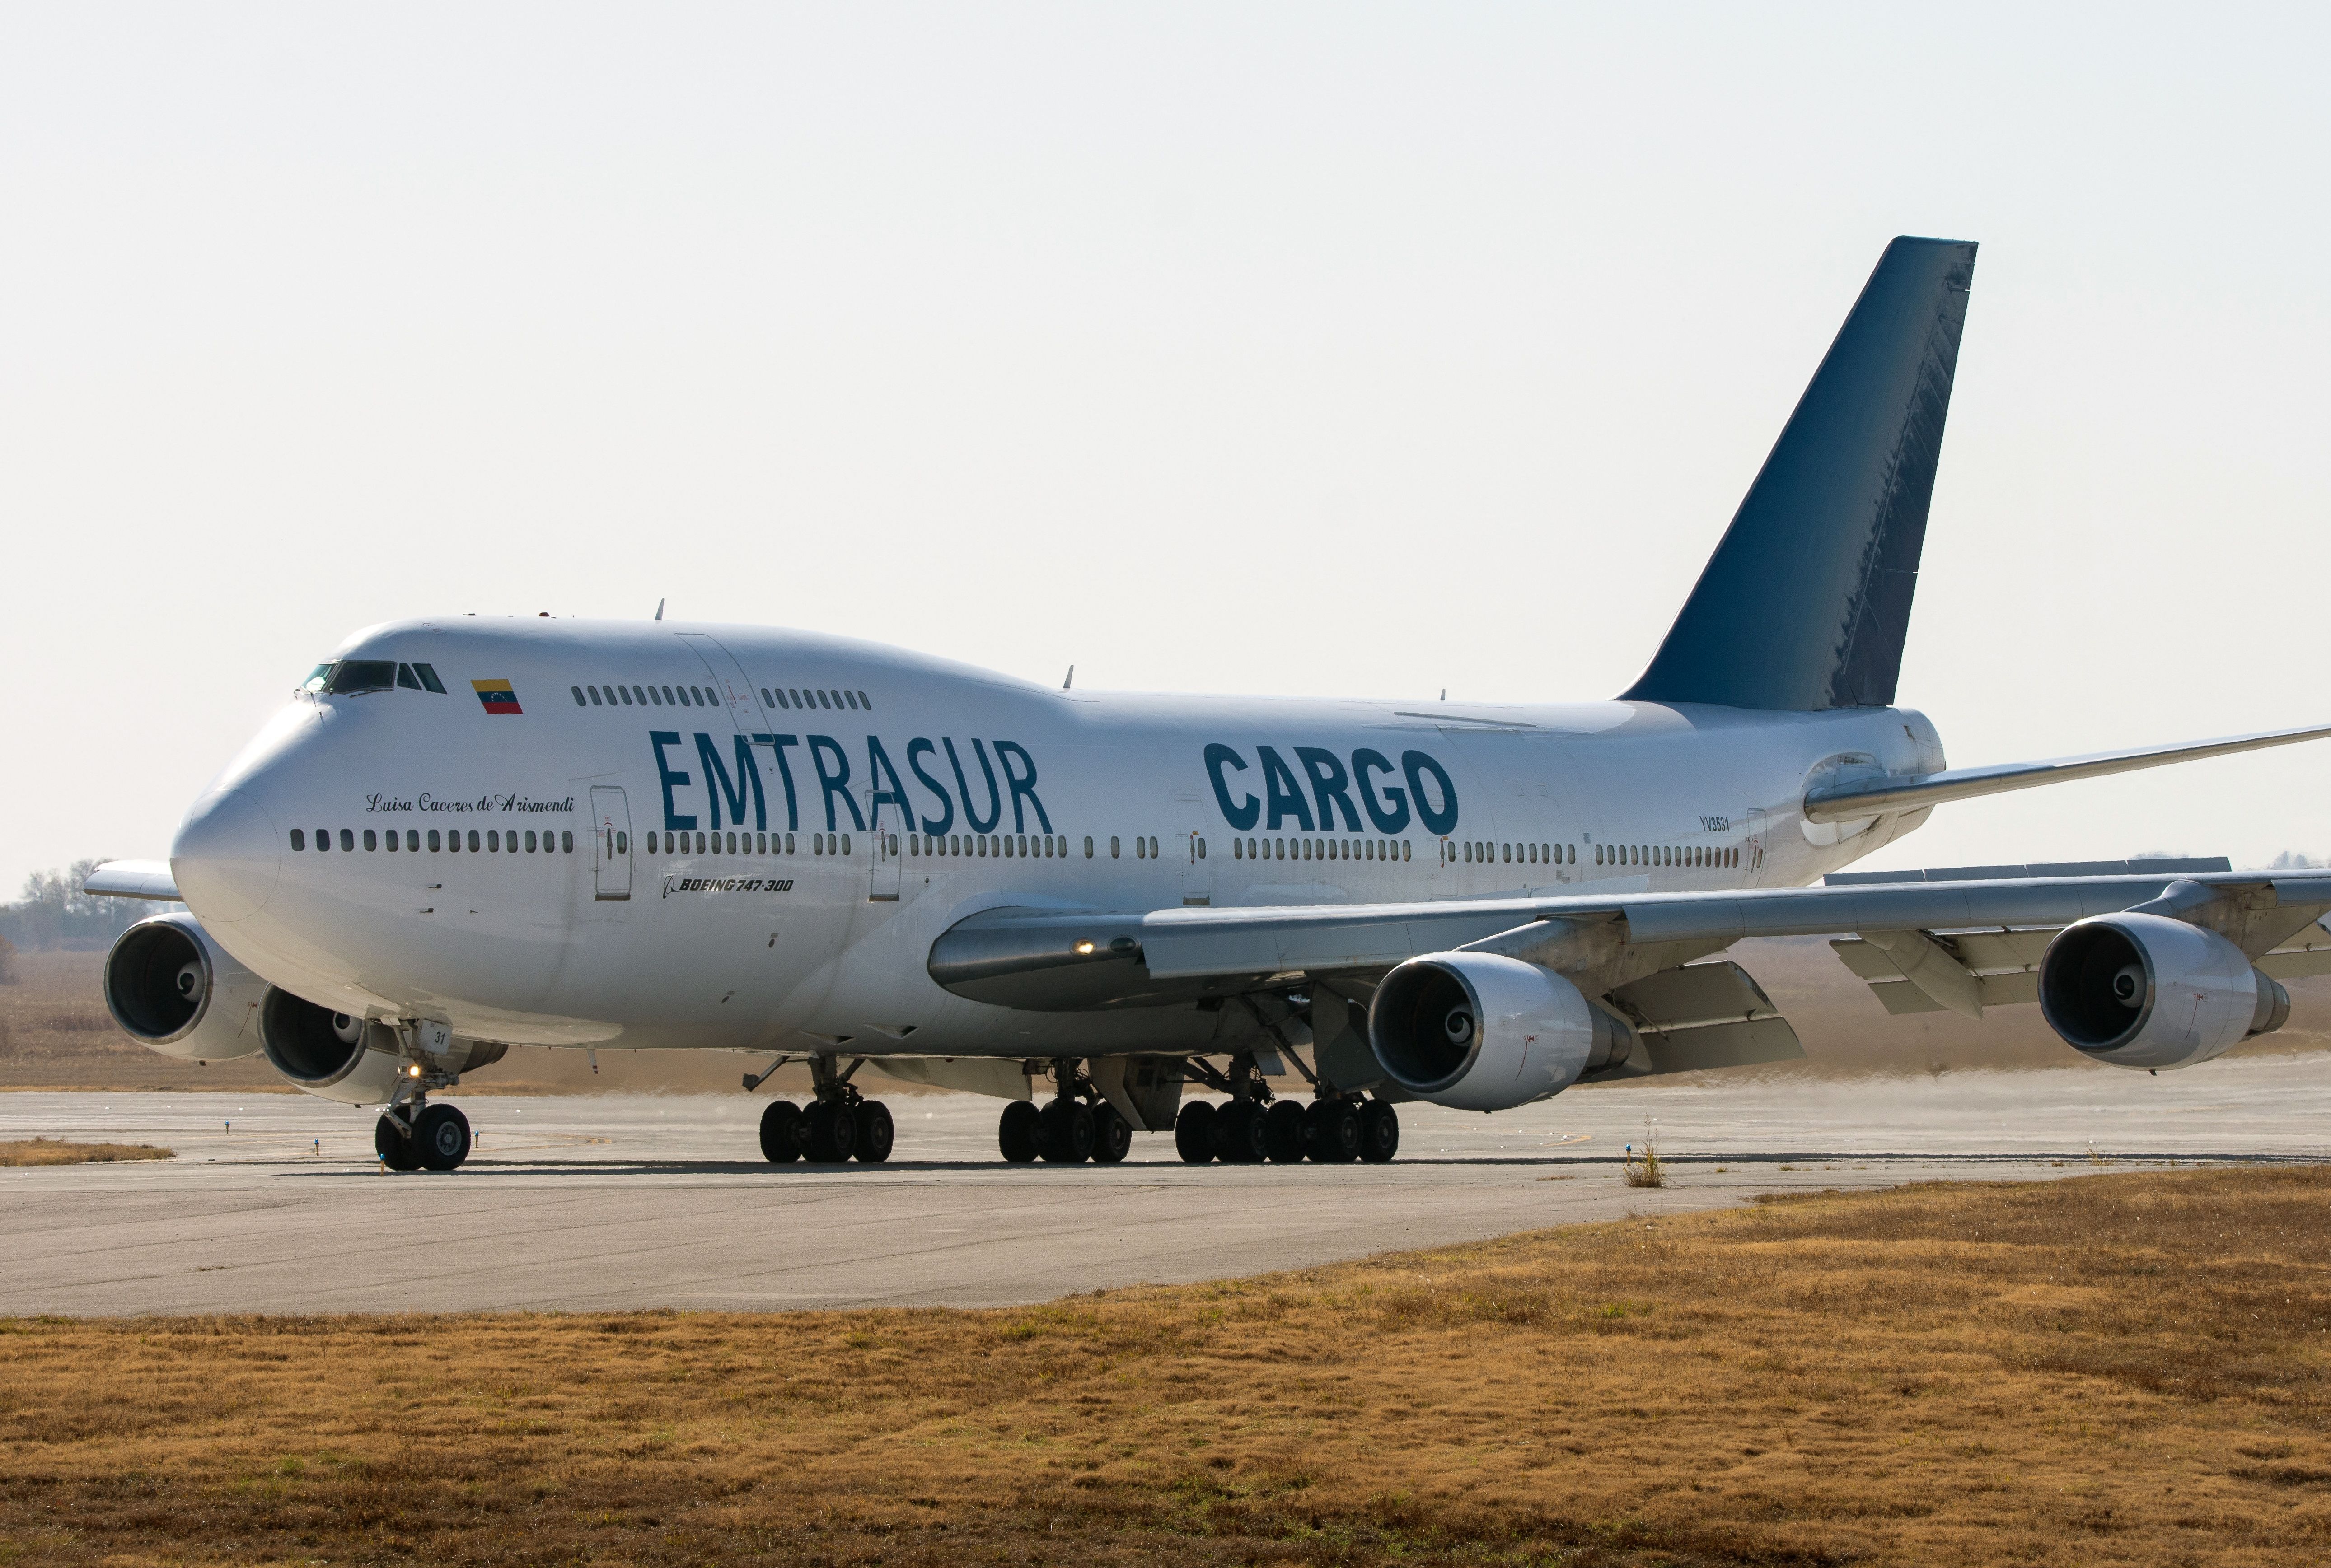 View of the Boeing 747-300 registrered number YV3531 of Venezuelan Emtrasur cargo airline at the international airport in Cordoba, Argentina, on June 6, 2022, before taking off for Buenos Aires.